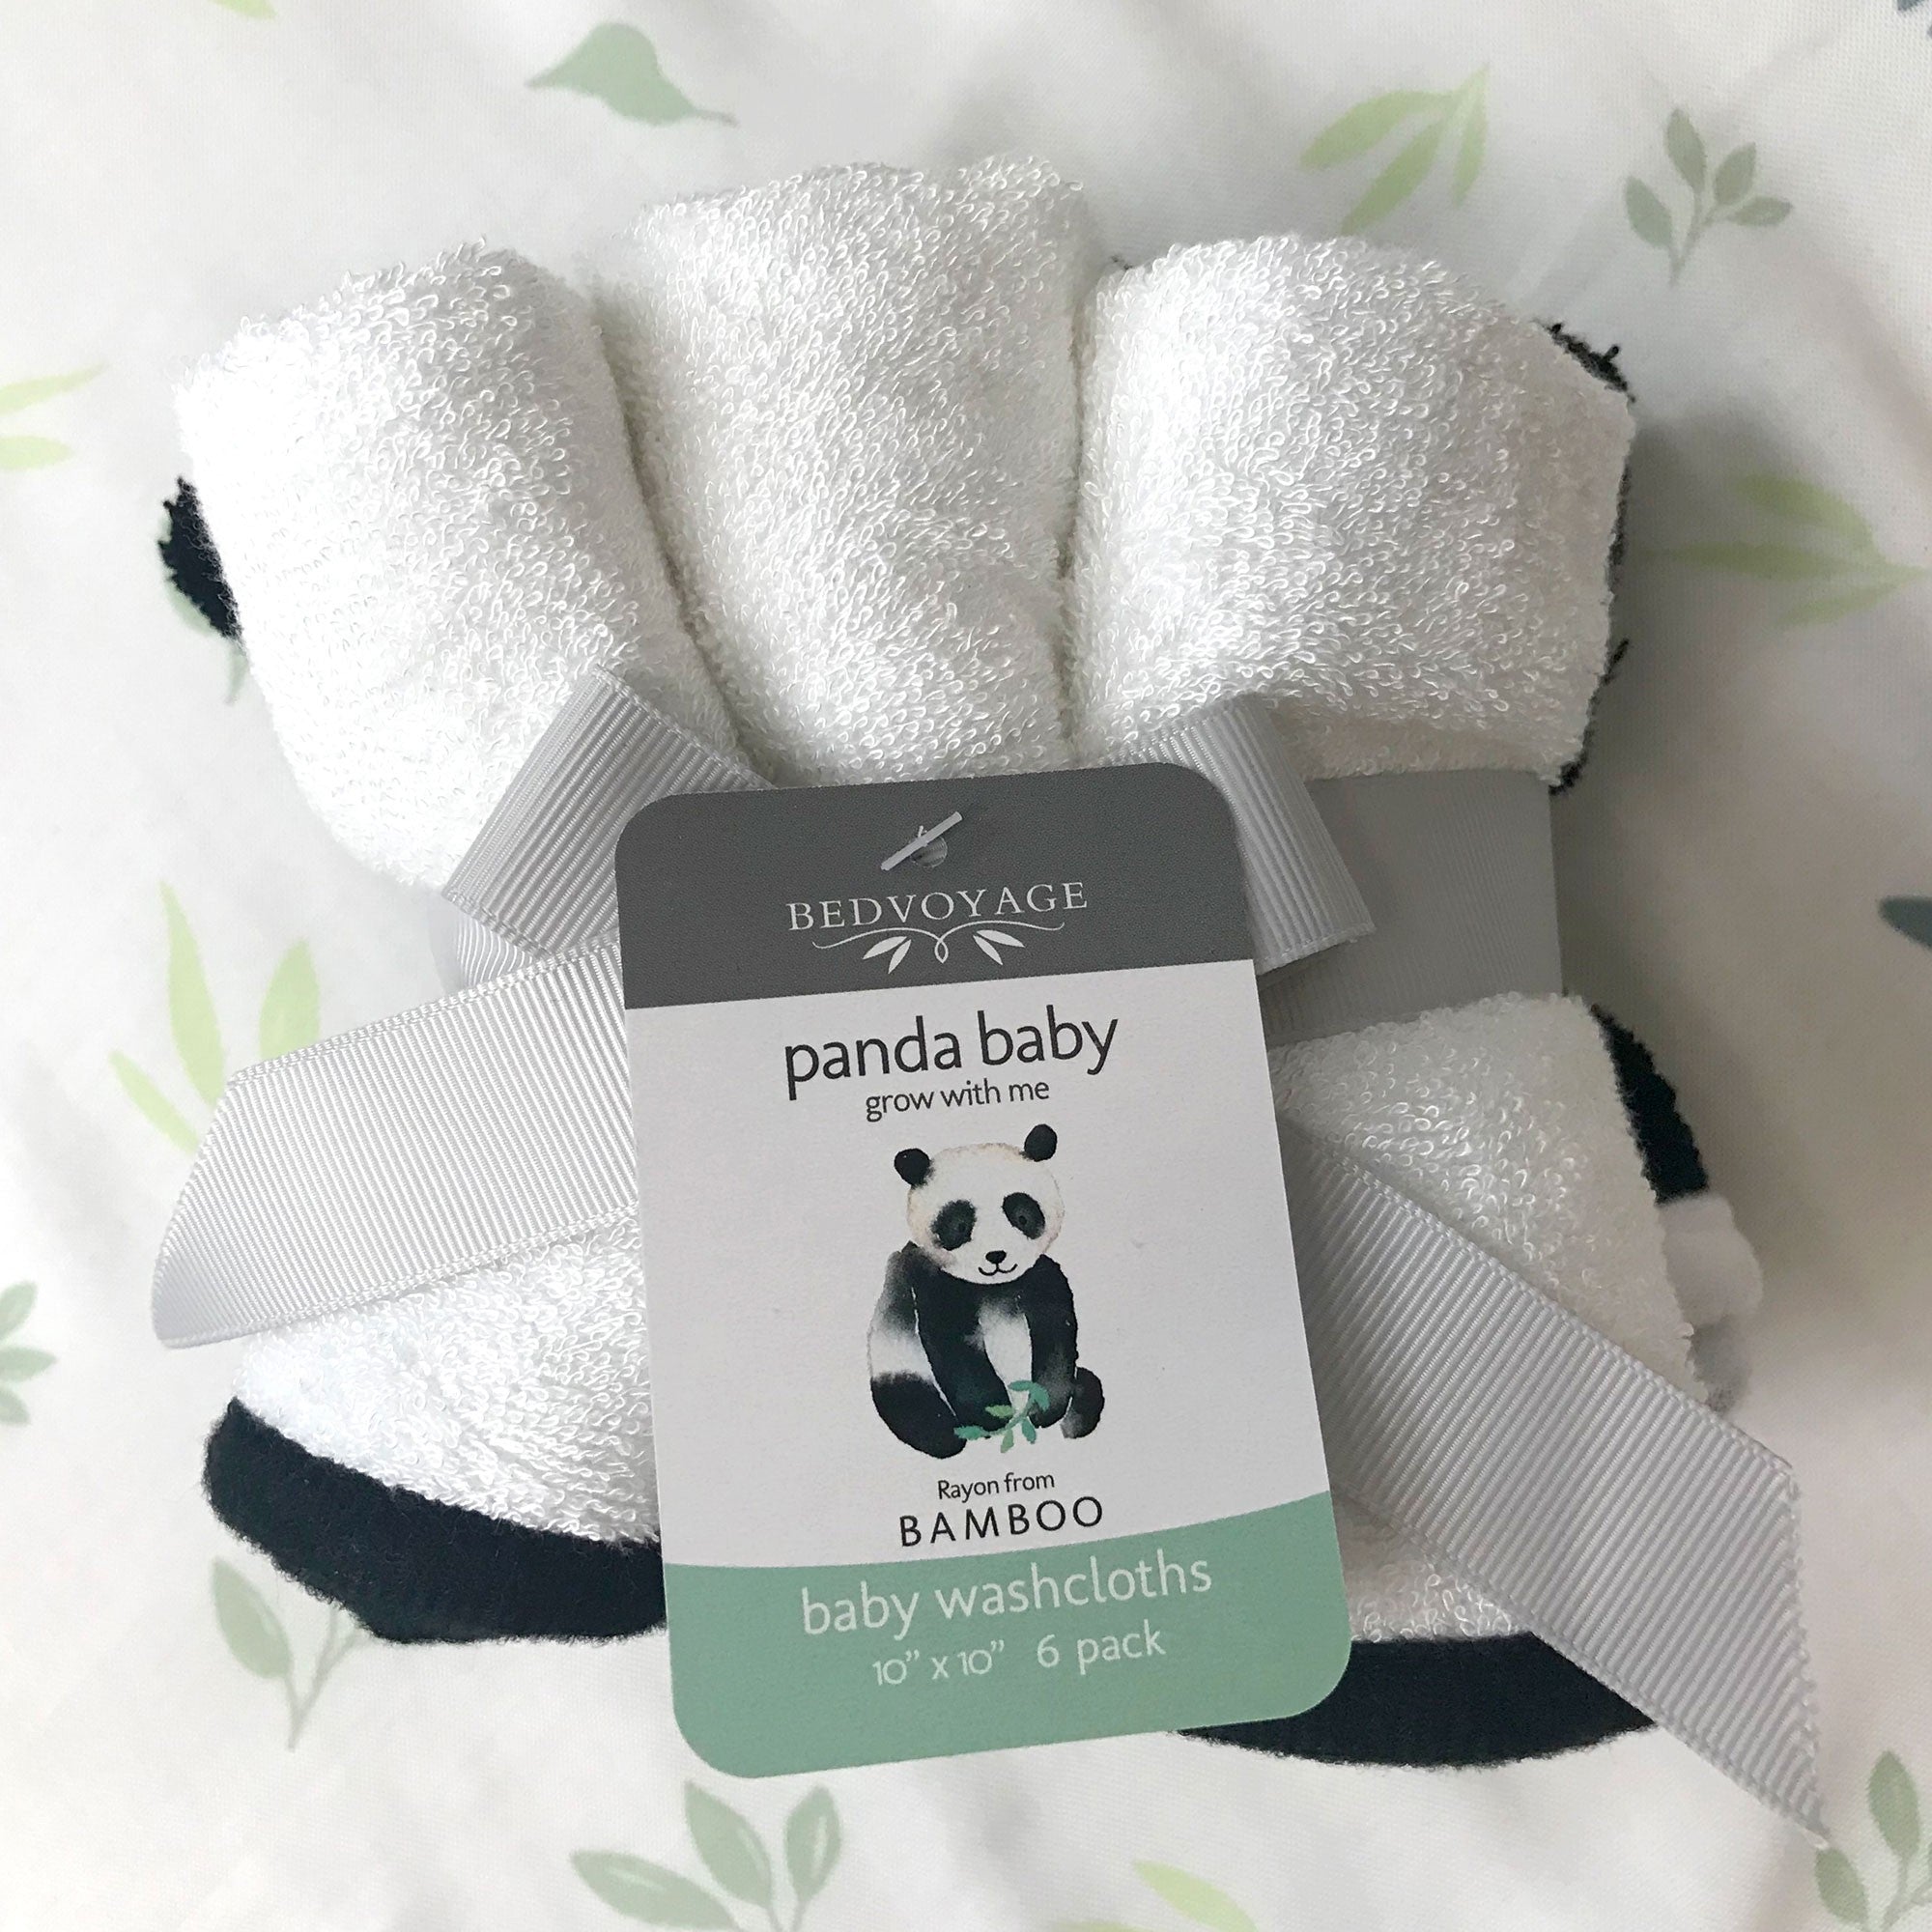 BAMBOO Baby Washcloths 6Pcs -Quick-Dry Baby Washcloths, Resistant to Bacteria, Odors and Mildew - White/Black